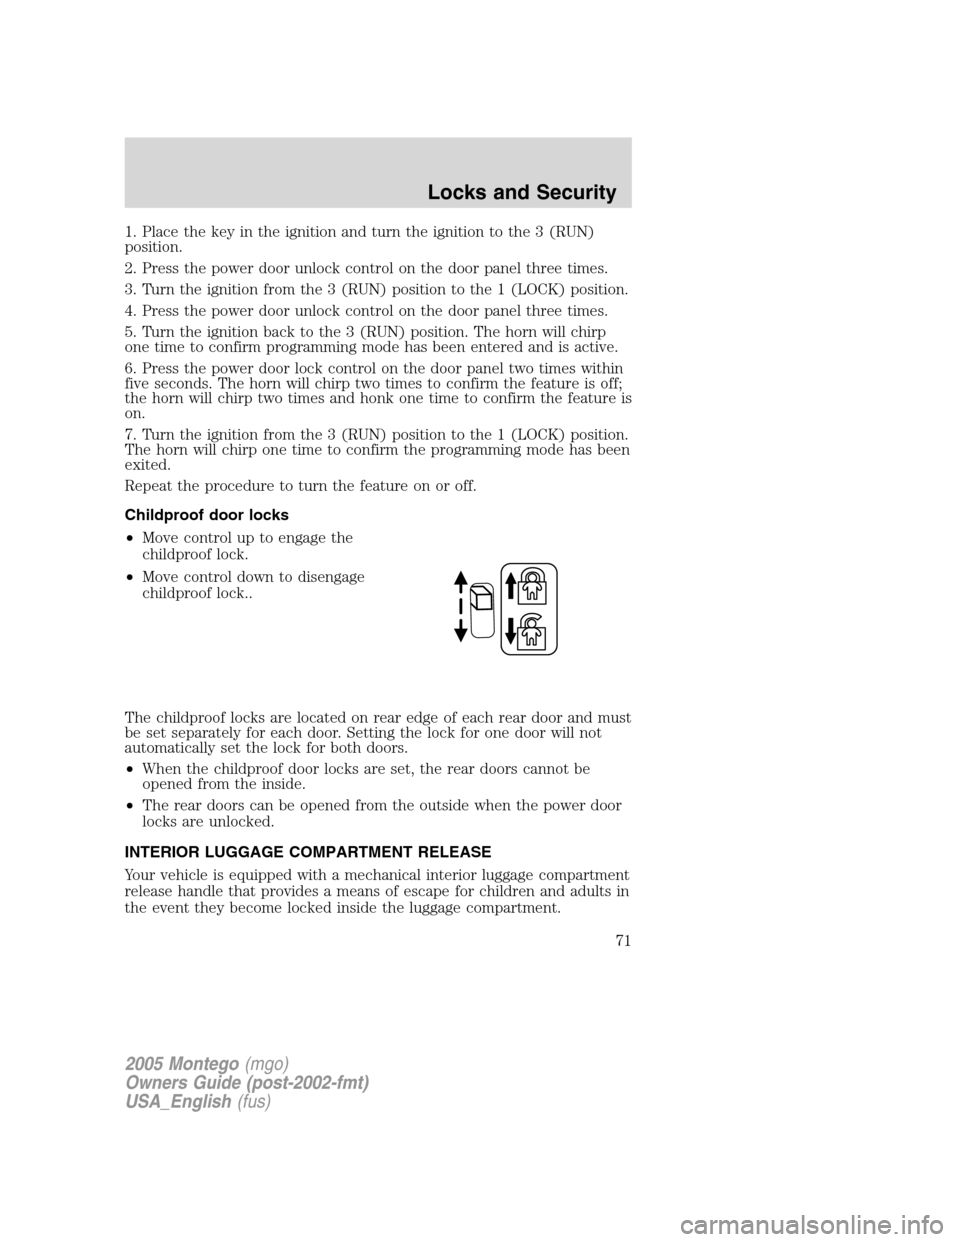 Mercury Montego 2005  s Manual PDF 1. Place the key in the ignition and turn the ignition to the 3 (RUN)
position.
2. Press the power door unlock control on the door panel three times.
3. Turn the ignition from the 3 (RUN) position to 